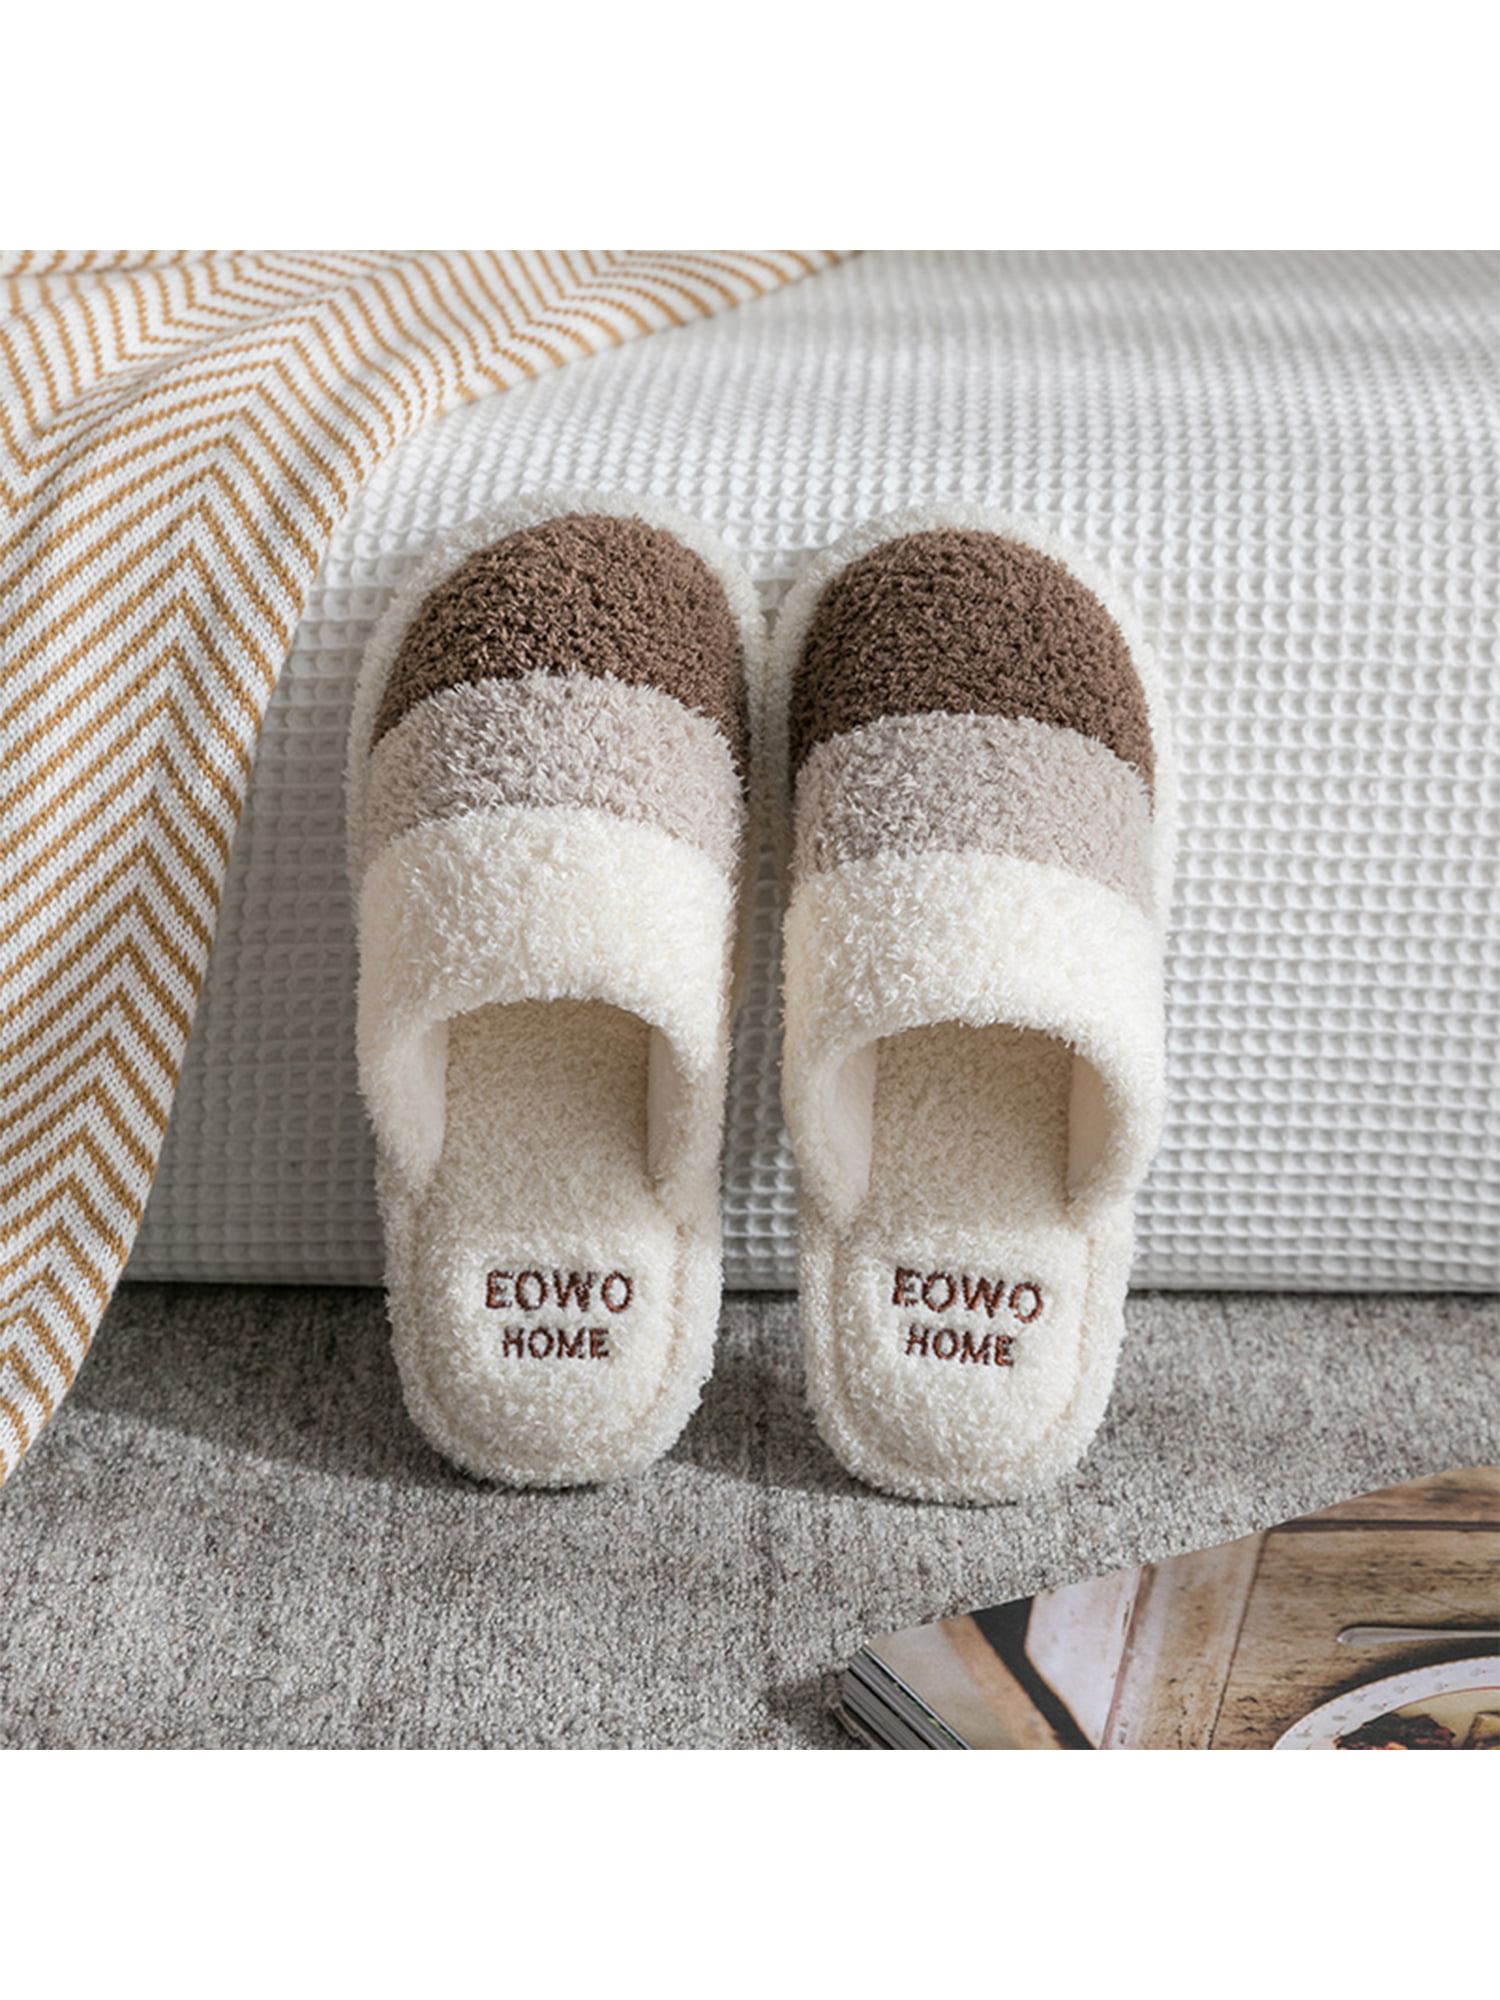 Indoor Outdoor Women Simple Fuzzy Fleece Soft Open-Toe Washable Home House Slippers Slip Shoes On Memory Foam Clog 